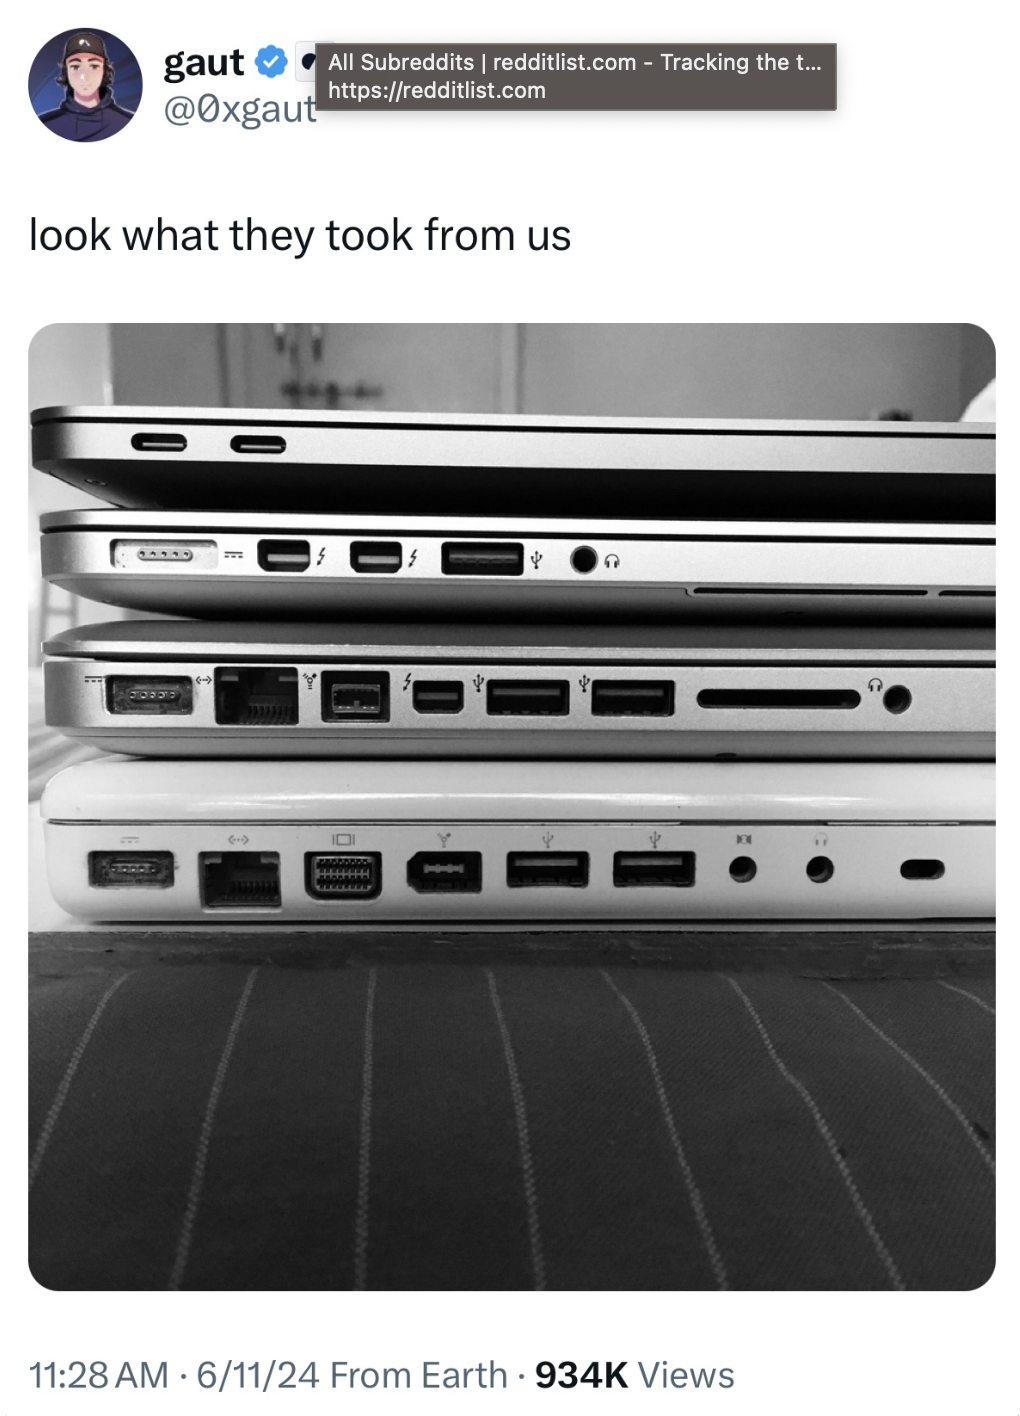 macbook ports - gaut All Subreddits redditlist.com Tracking the t... look what they took from us 61124 From Earth Views